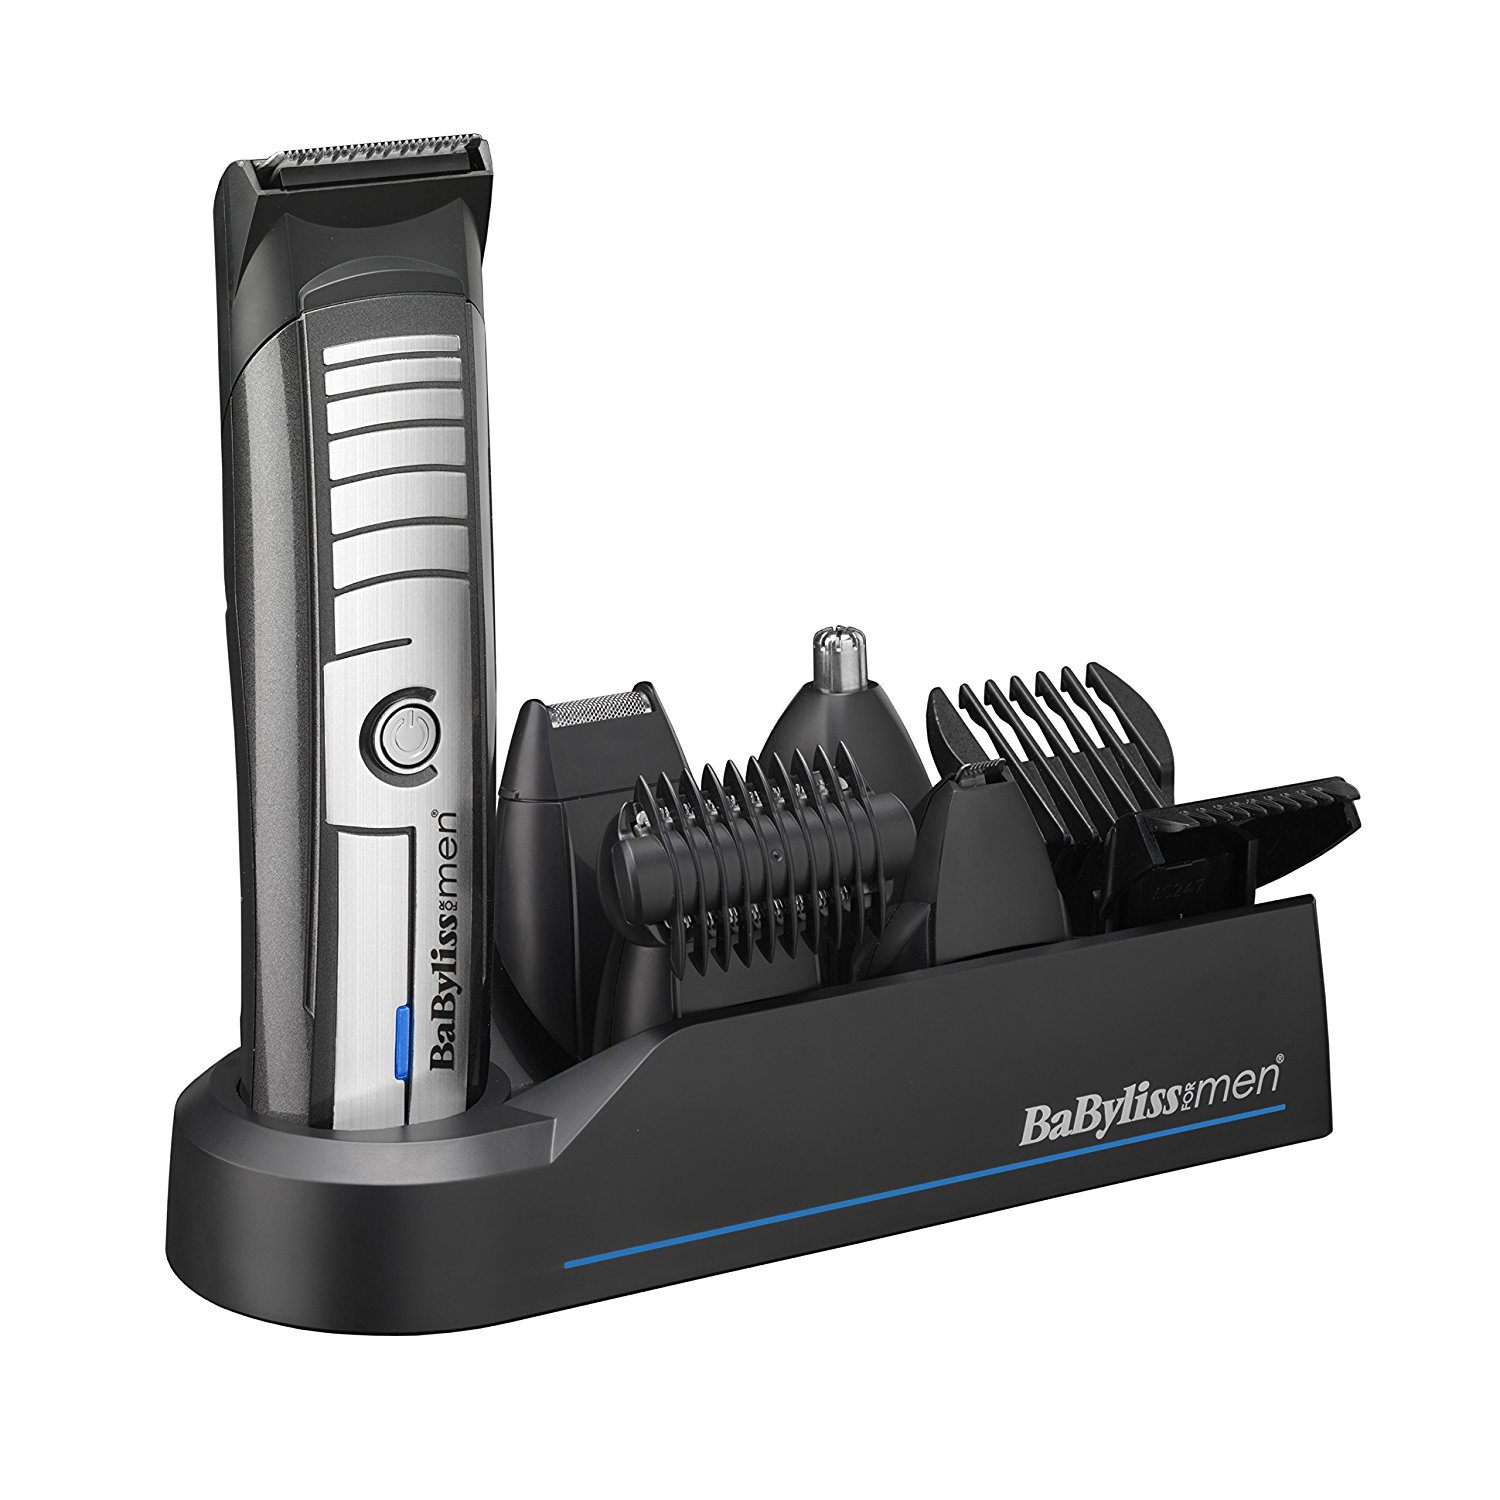 number two rated babyliss hair clippers